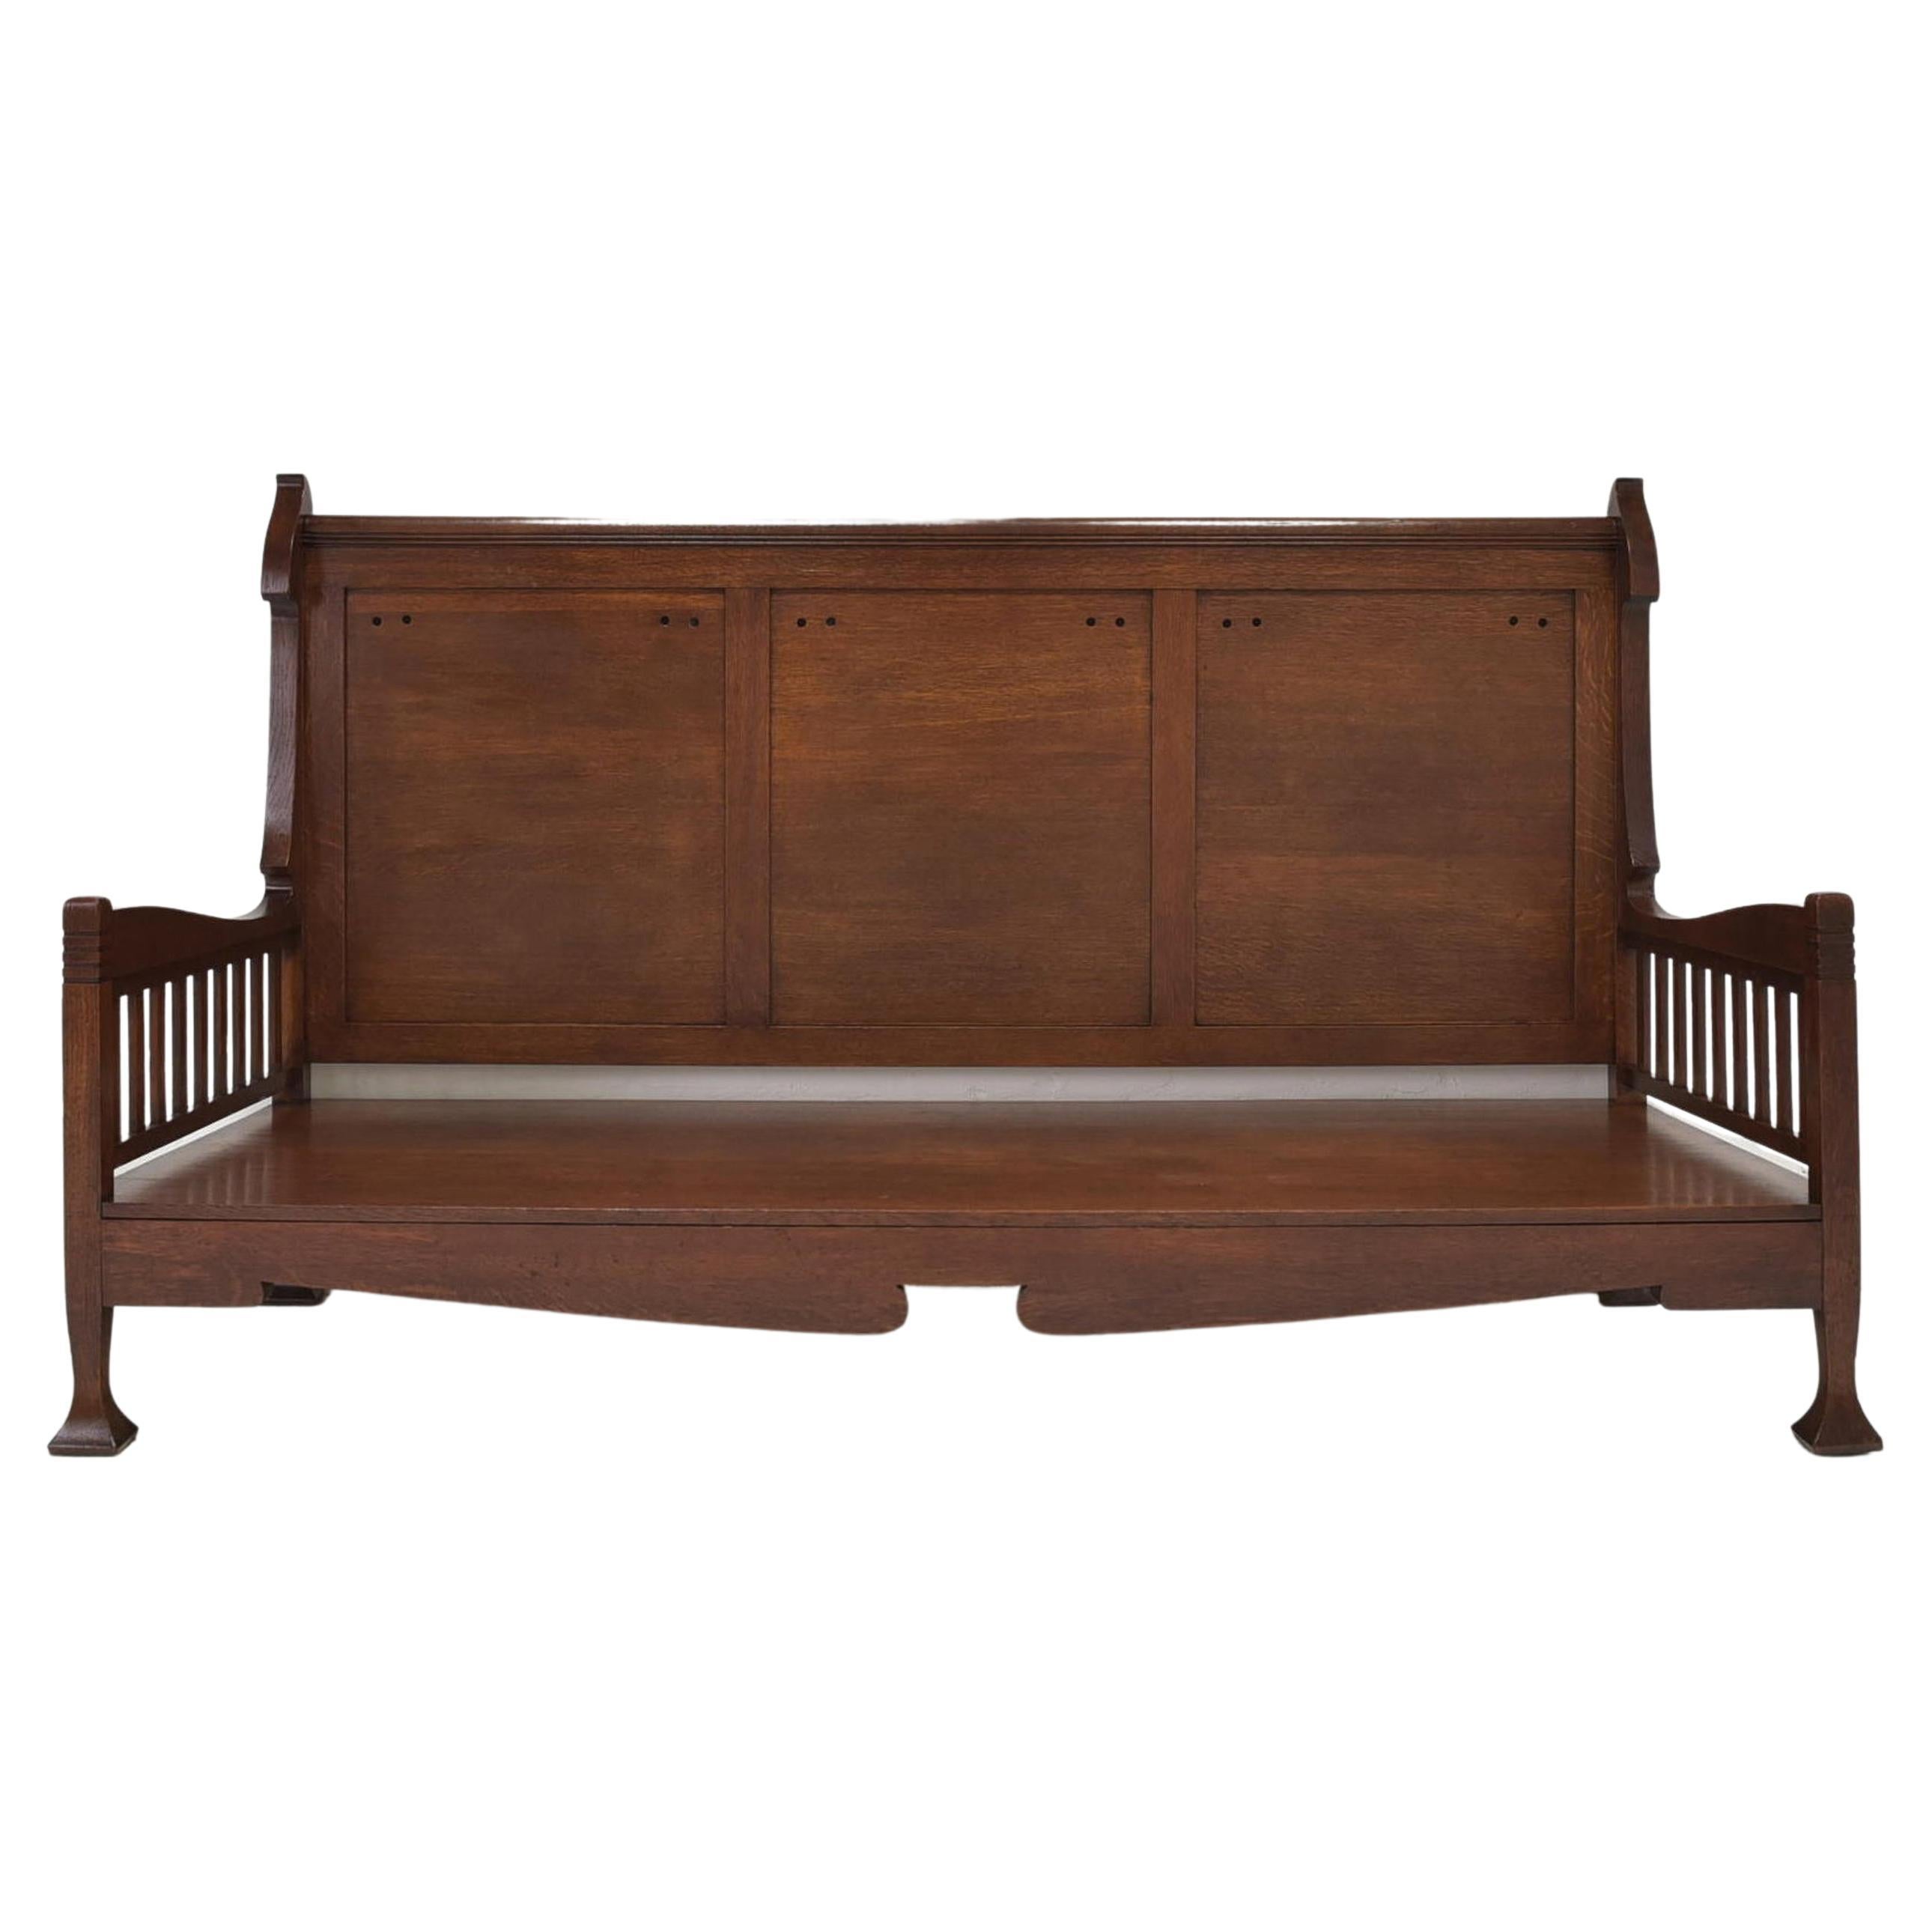 Art Nouveau Daybed in Solid Oak / Lounger Sofa, 1905